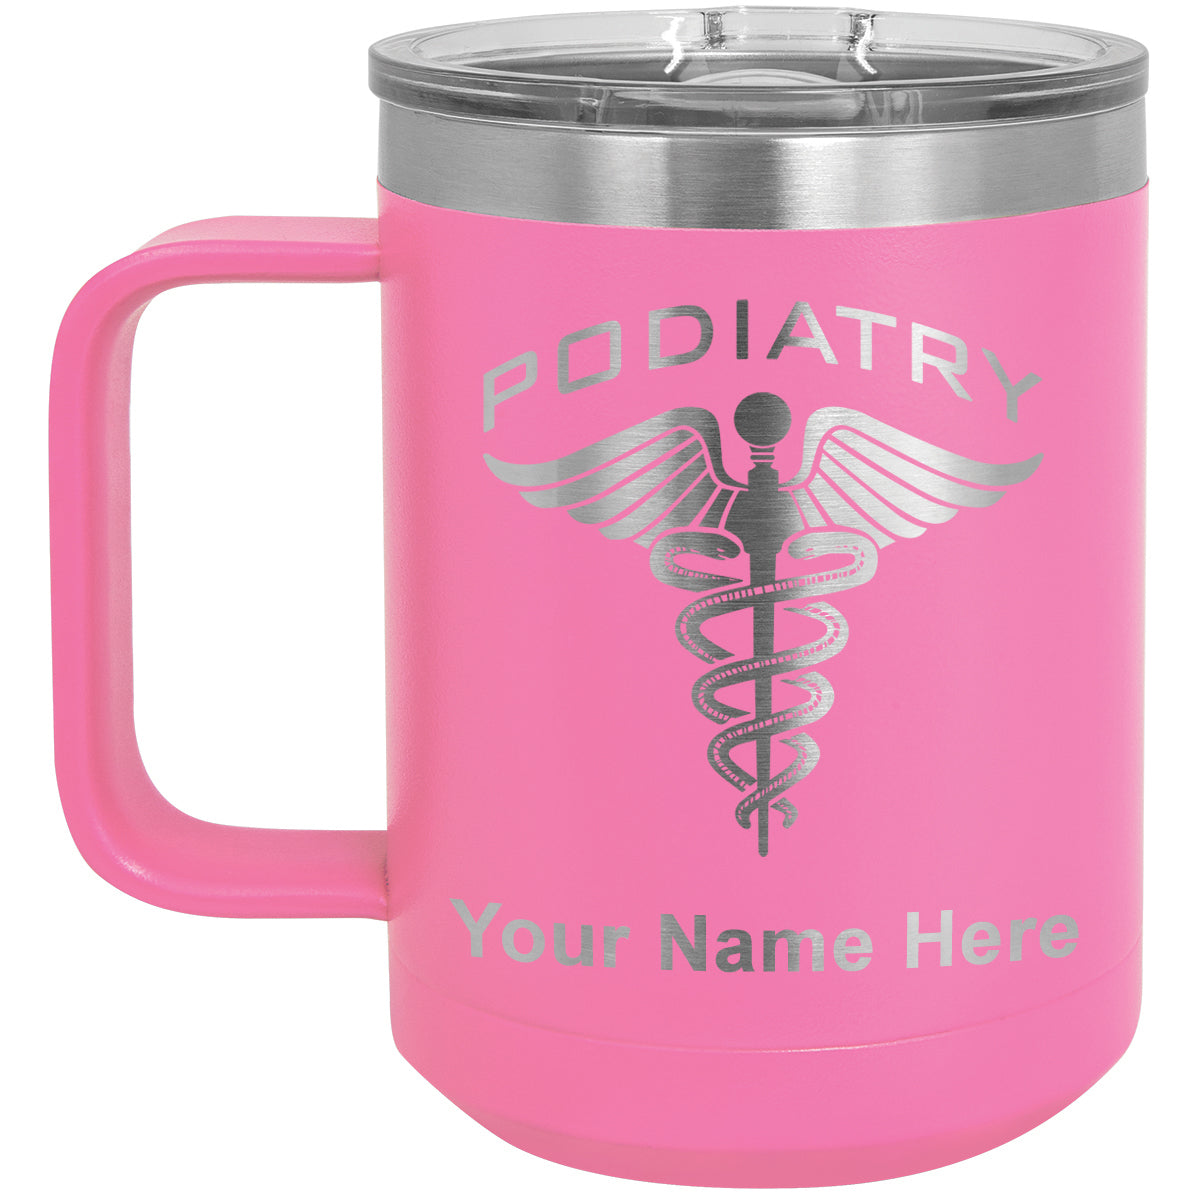 15oz Vacuum Insulated Coffee Mug, Podiatry, Personalized Engraving Included